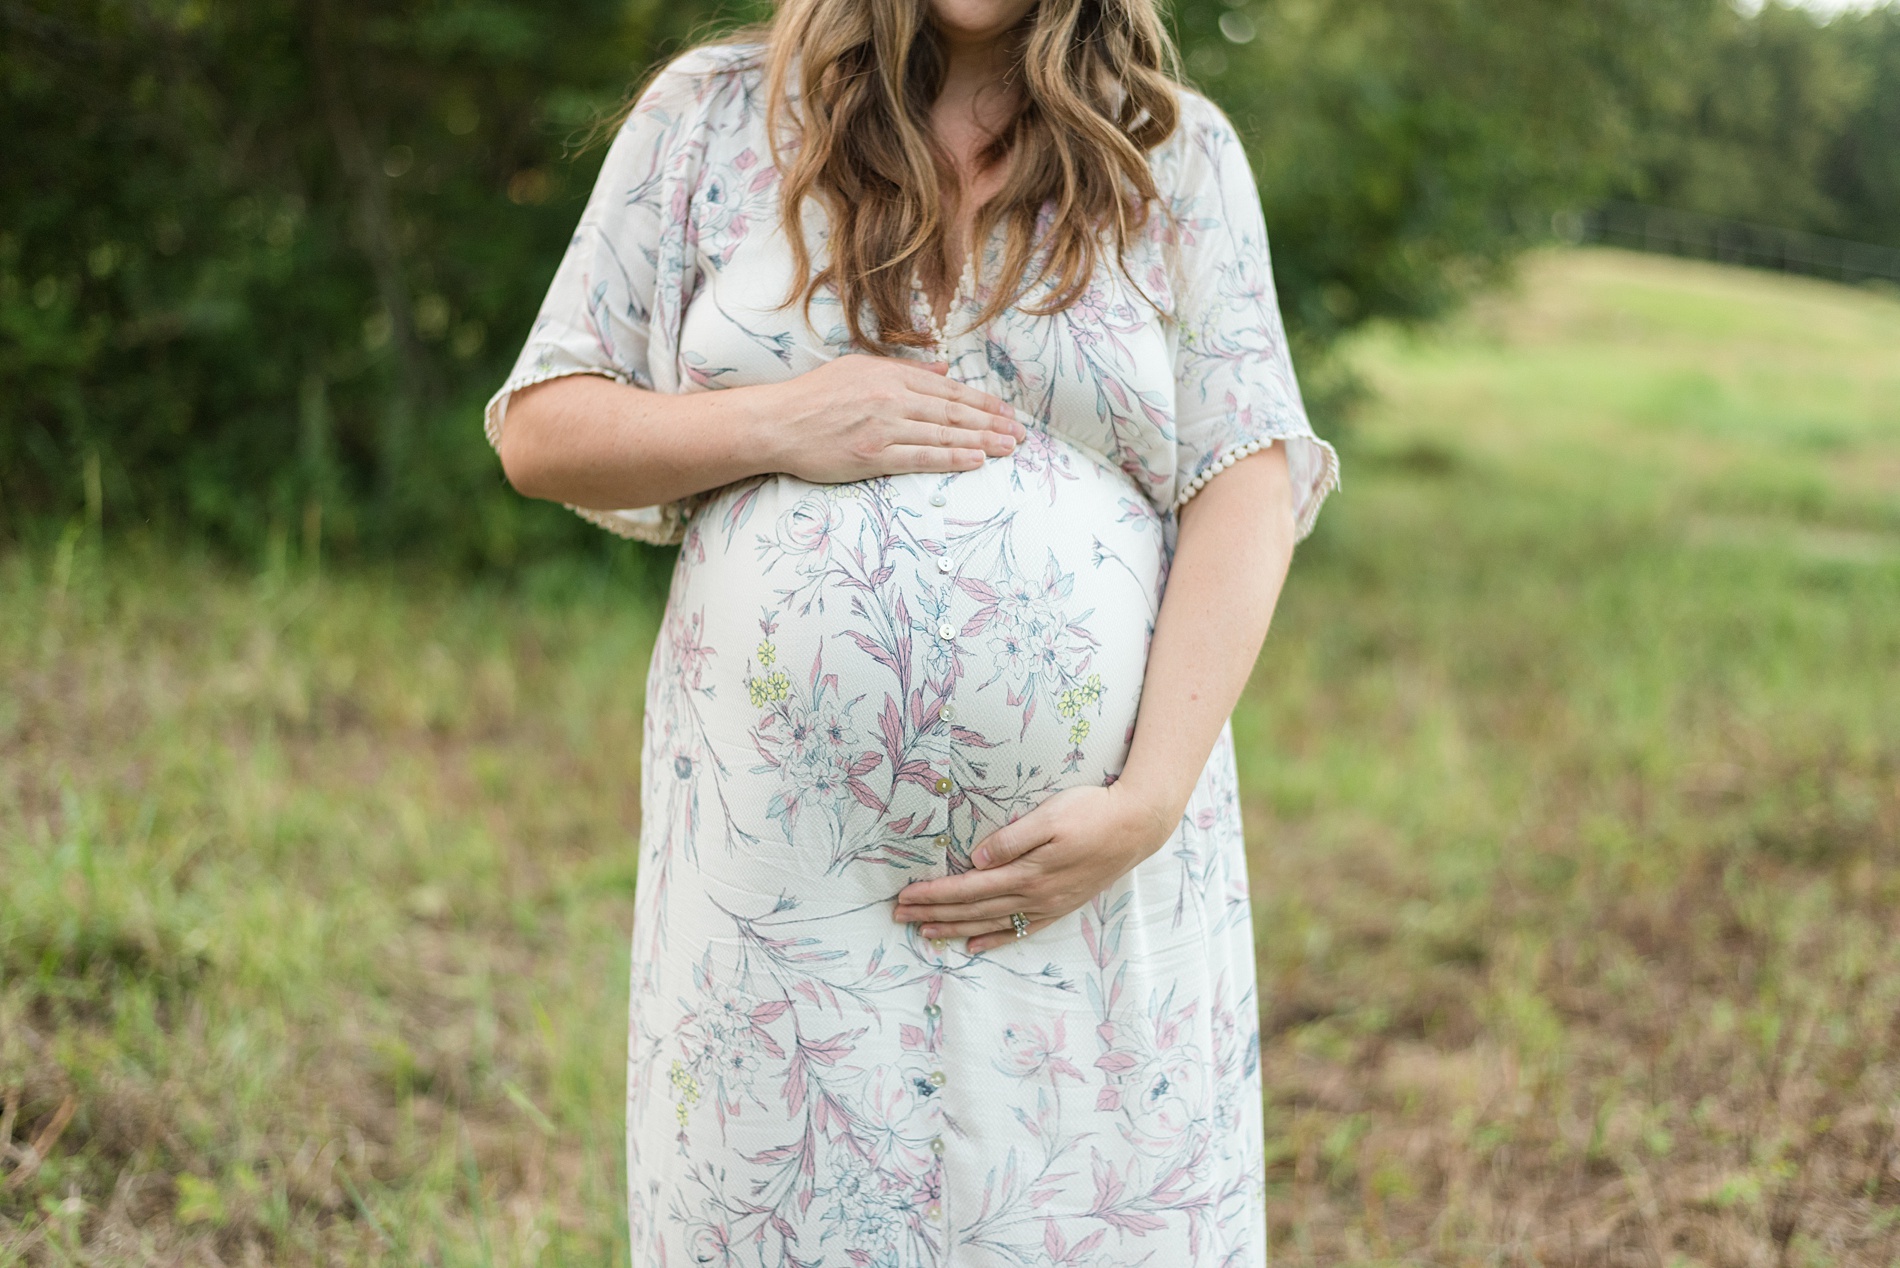 baby bump of pregnant woman